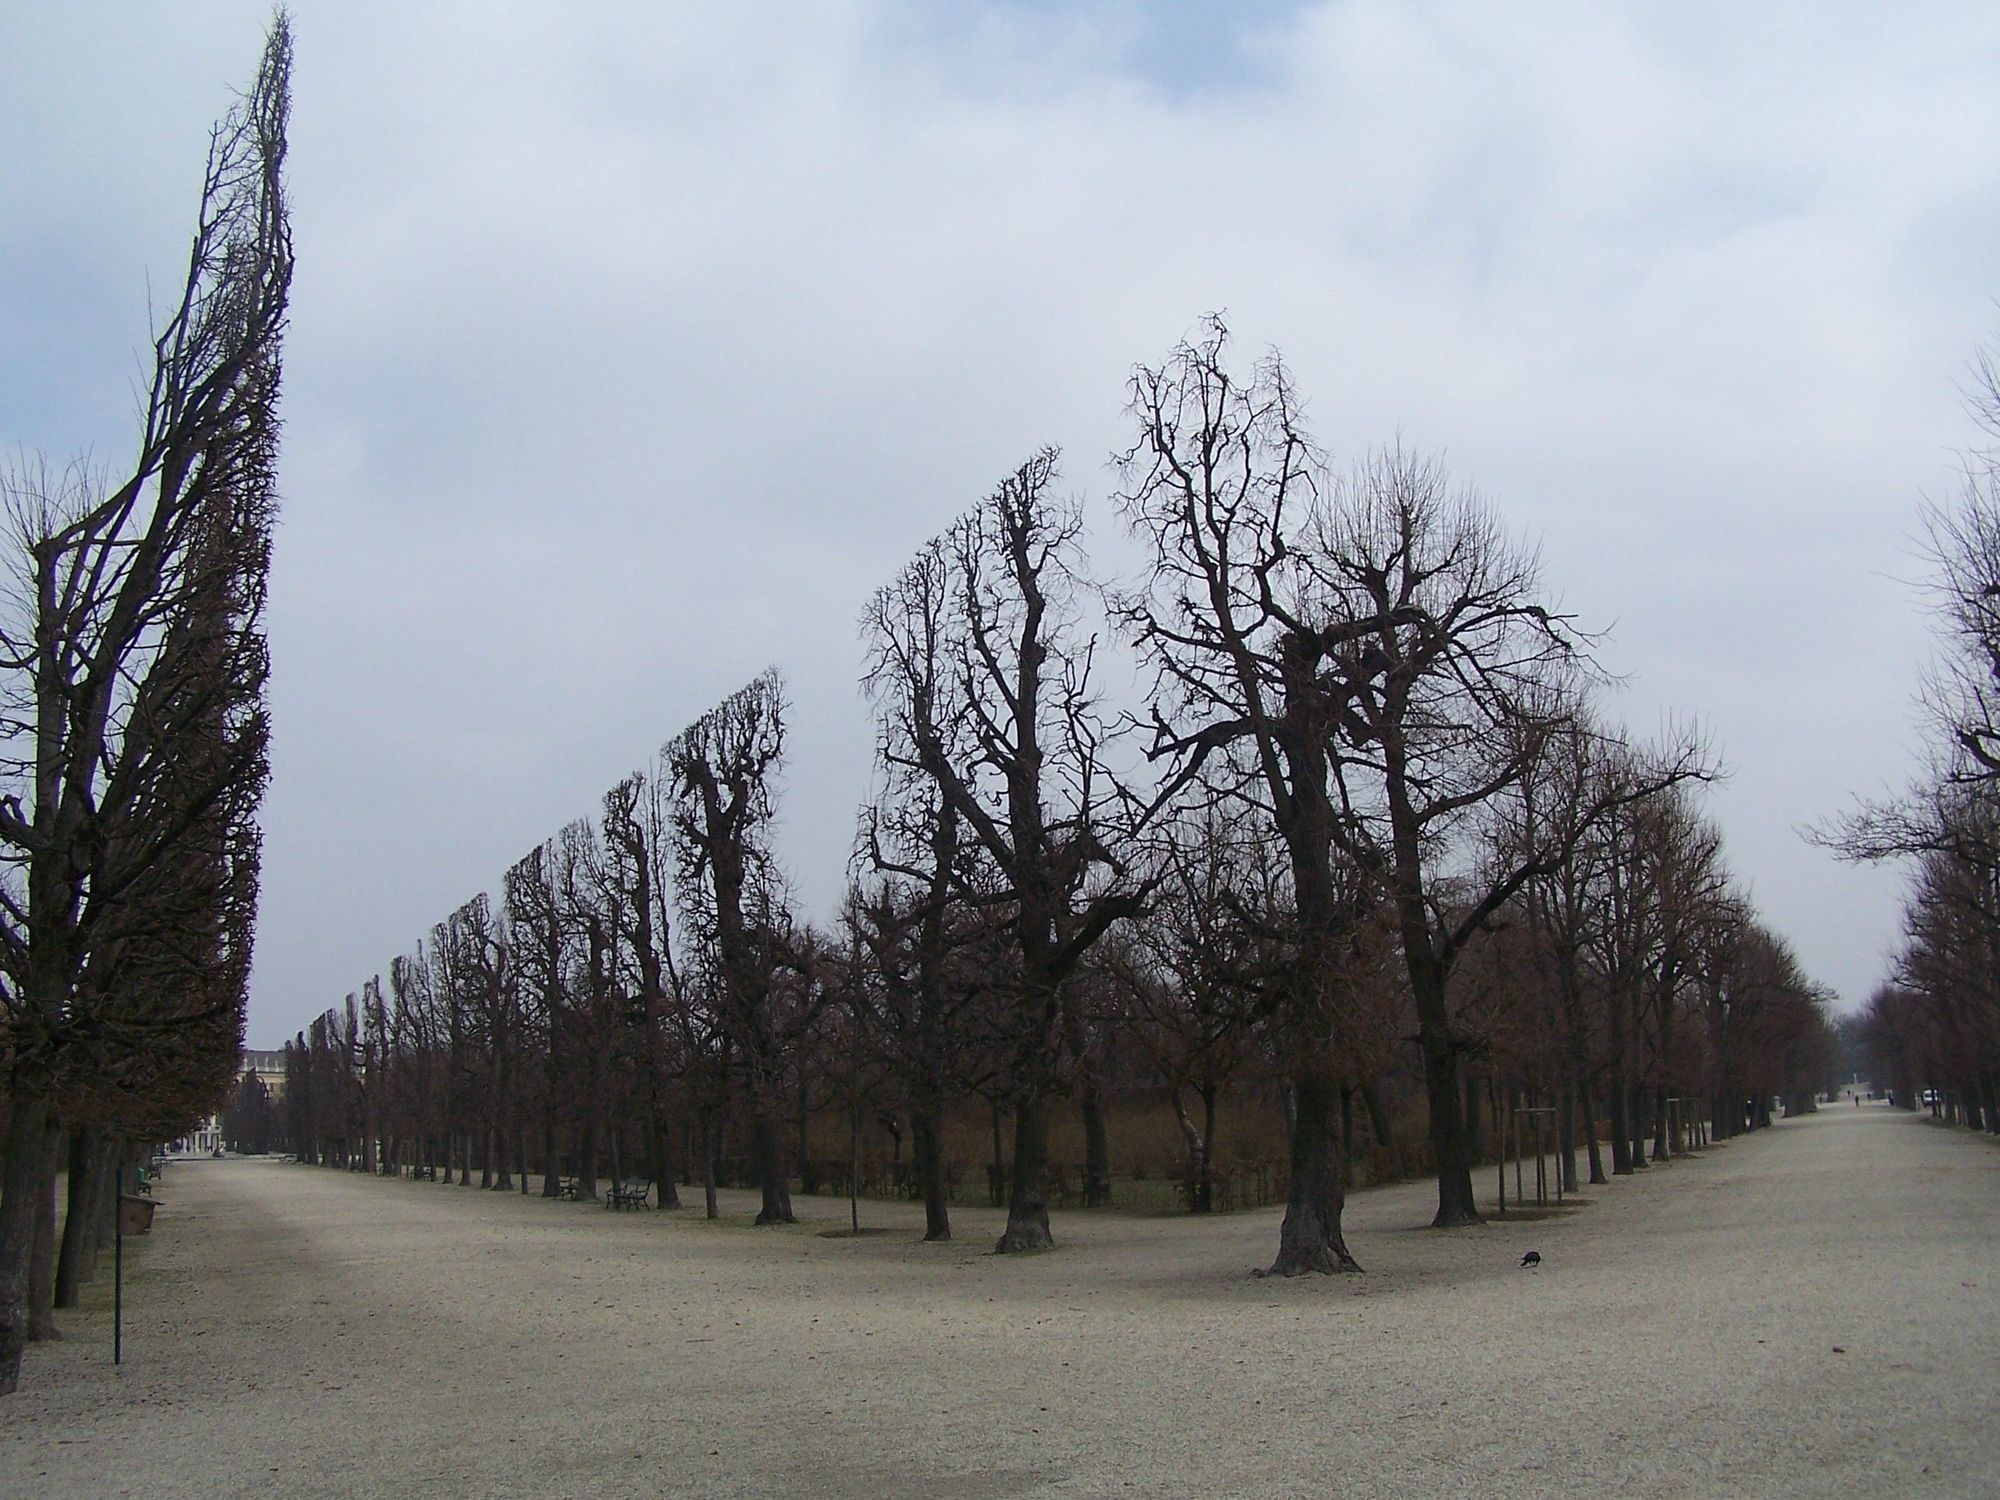 This looks like a scene from a sci-fi film, but they are actually real trees. They are pruned to appear in perfect straight lines.